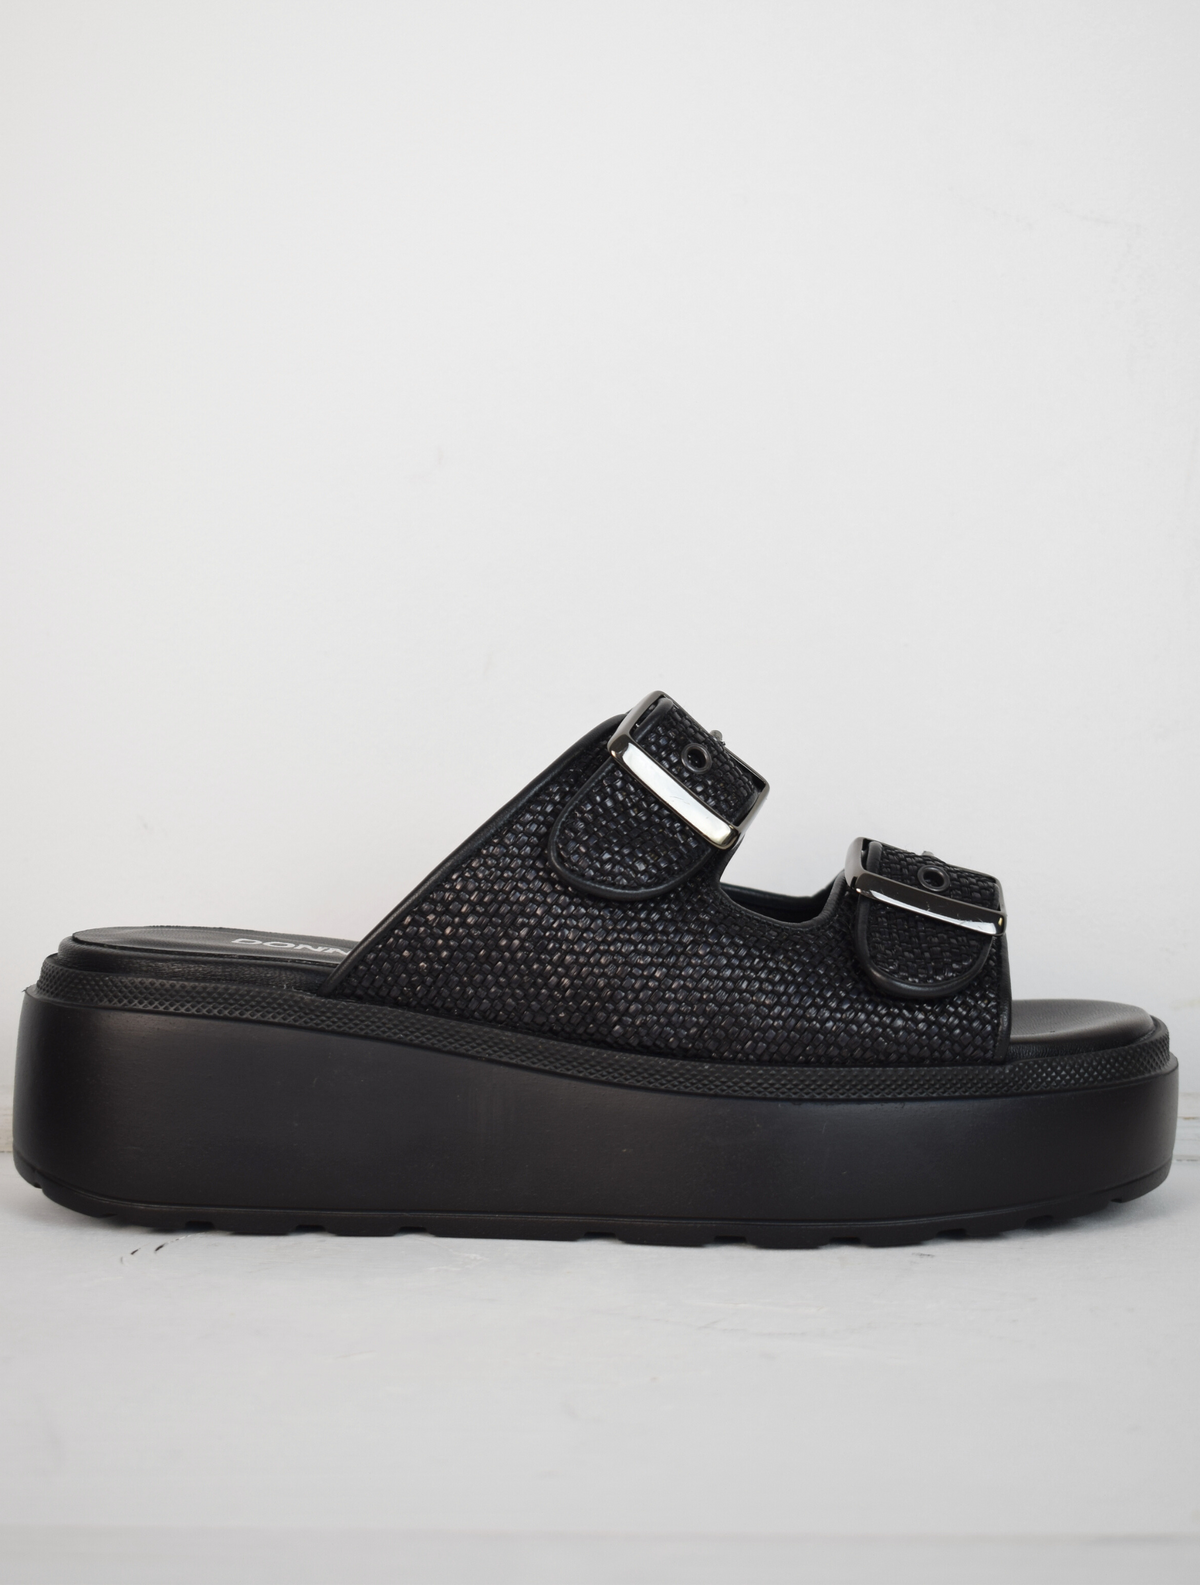 Black raffia sliders with double strap and platform sole